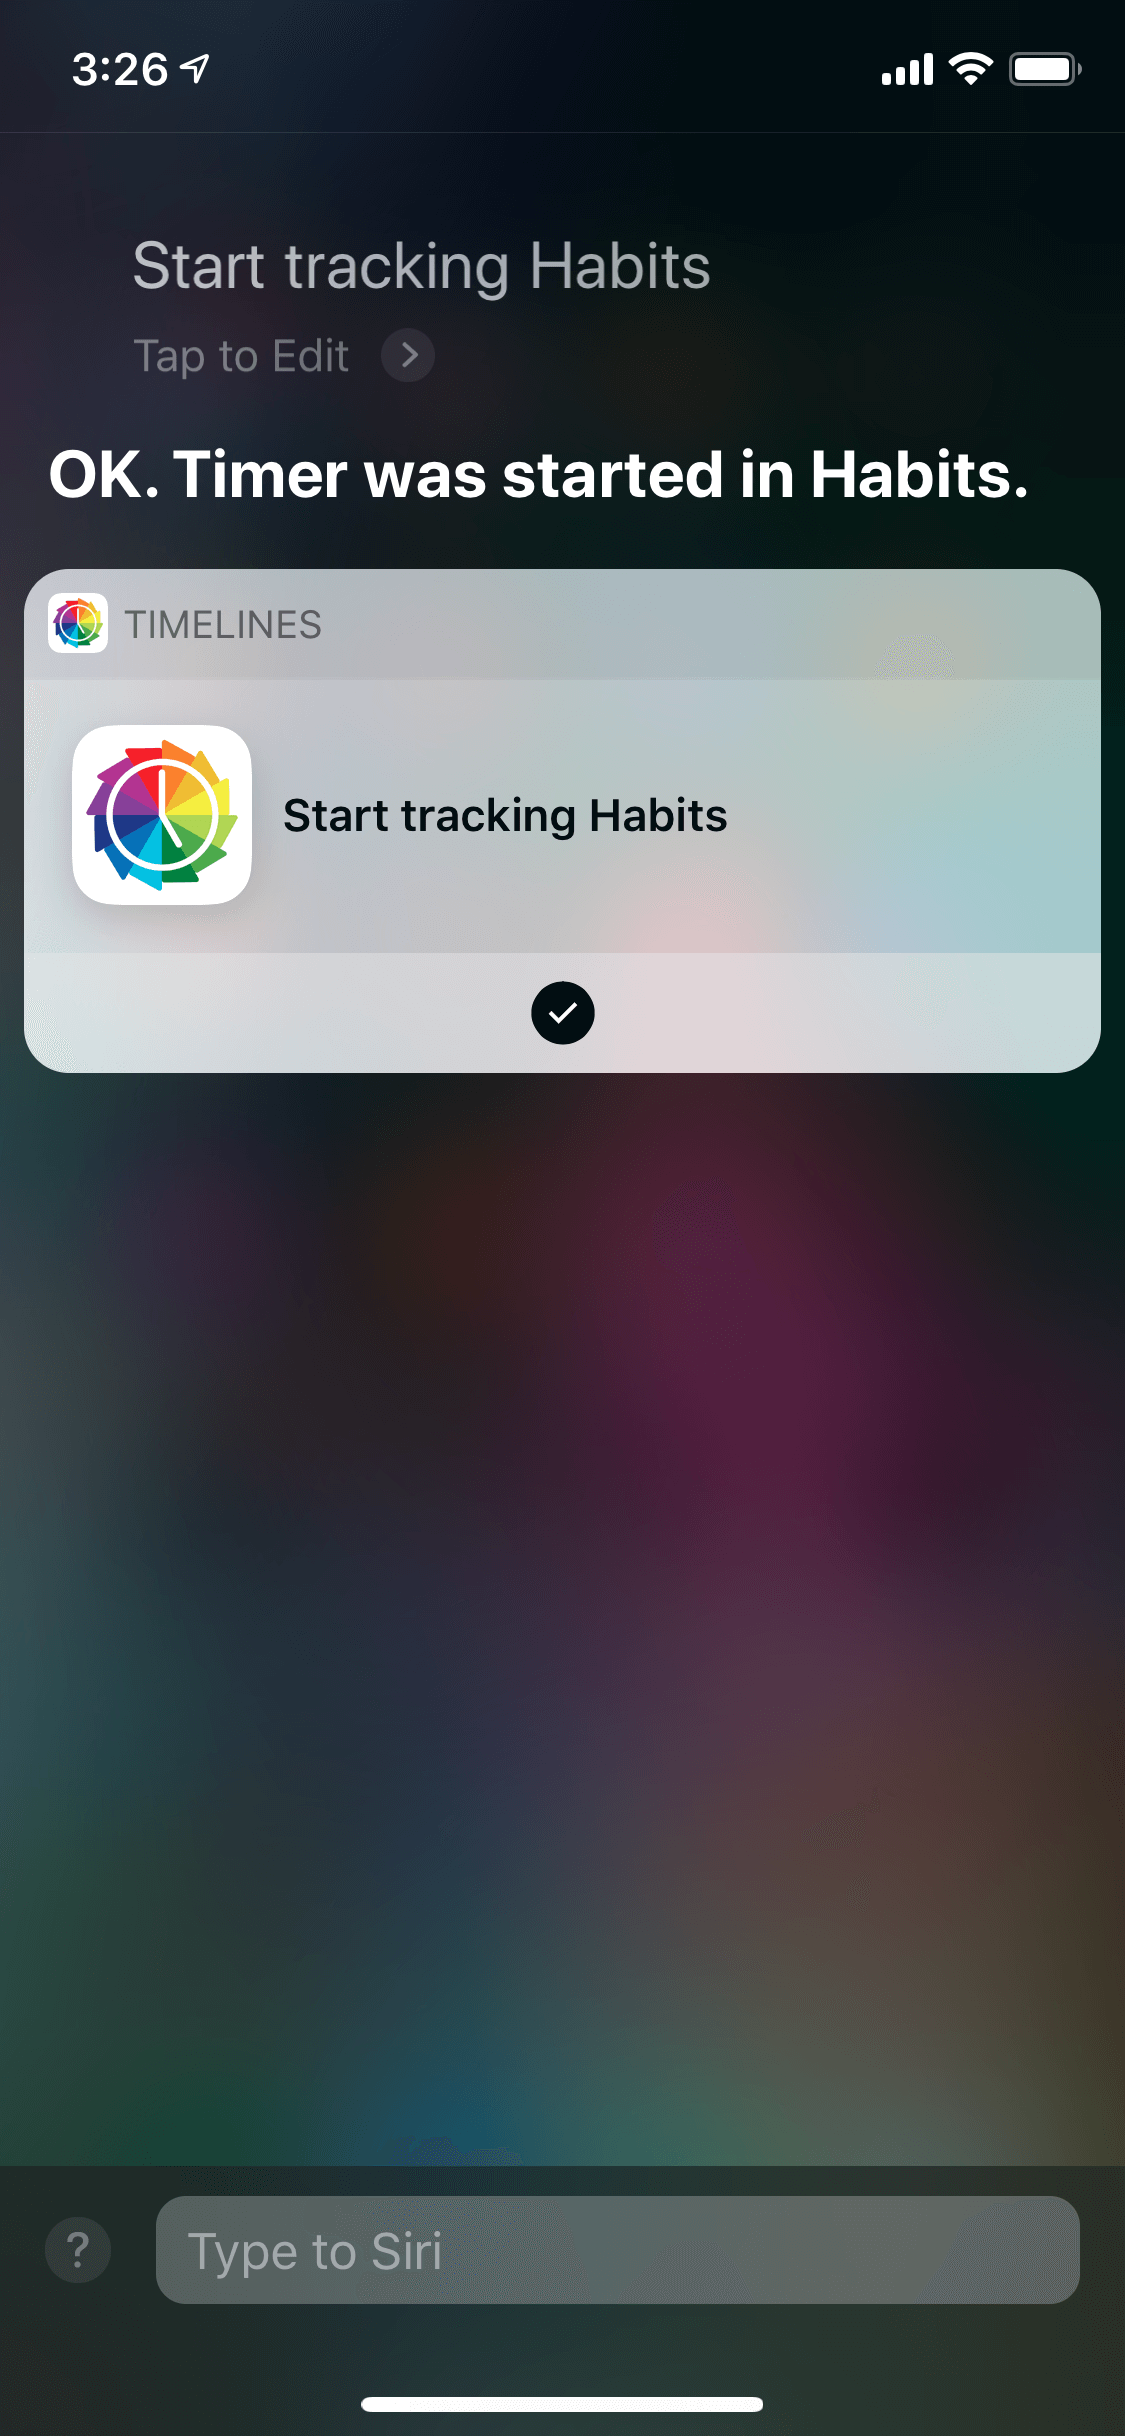 Timelines App Siri Shortcuts started tracking